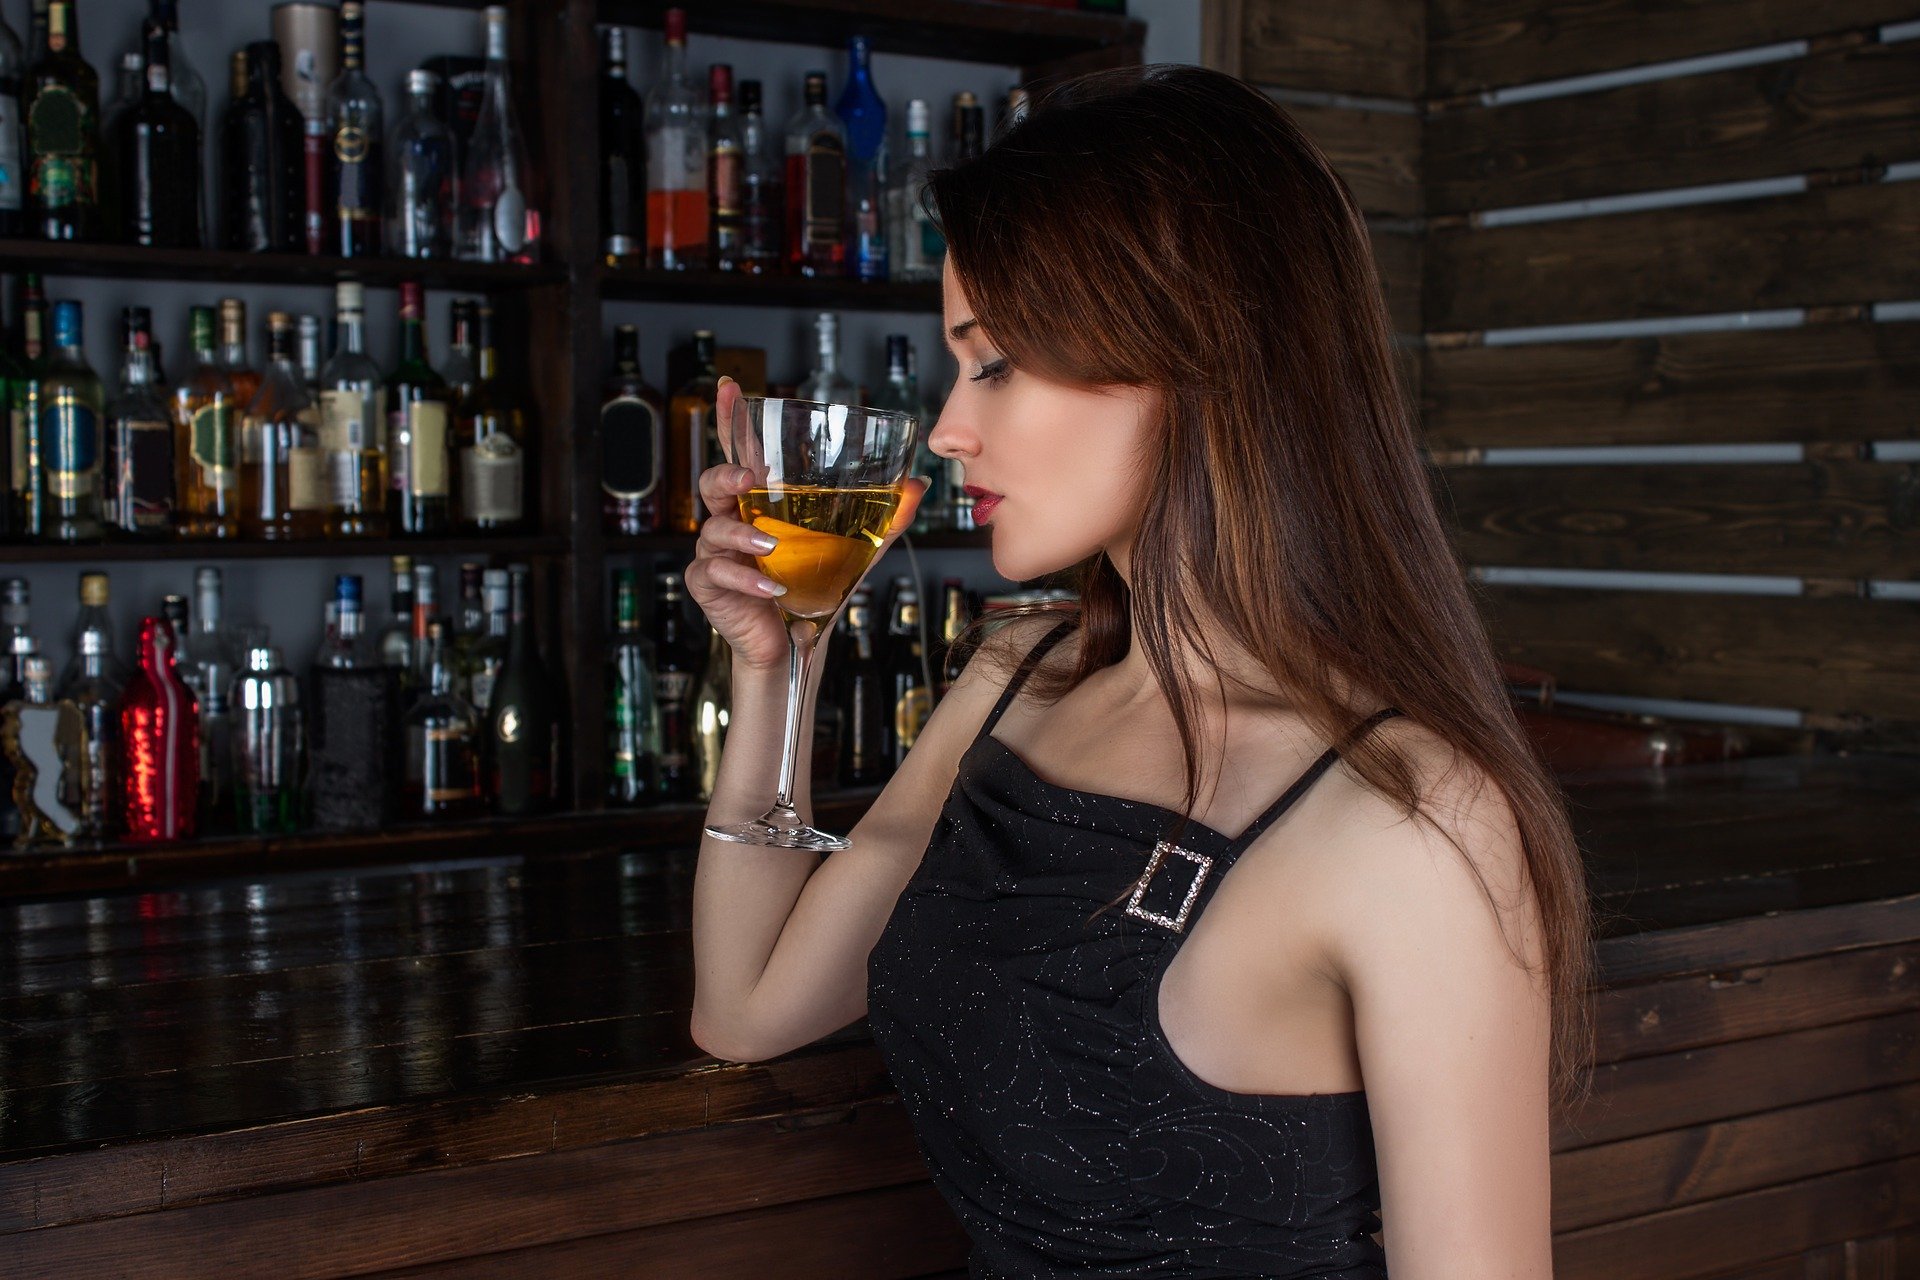 A beautiful young woman sitting alone at the bar drinking. | Source: Pixabay.